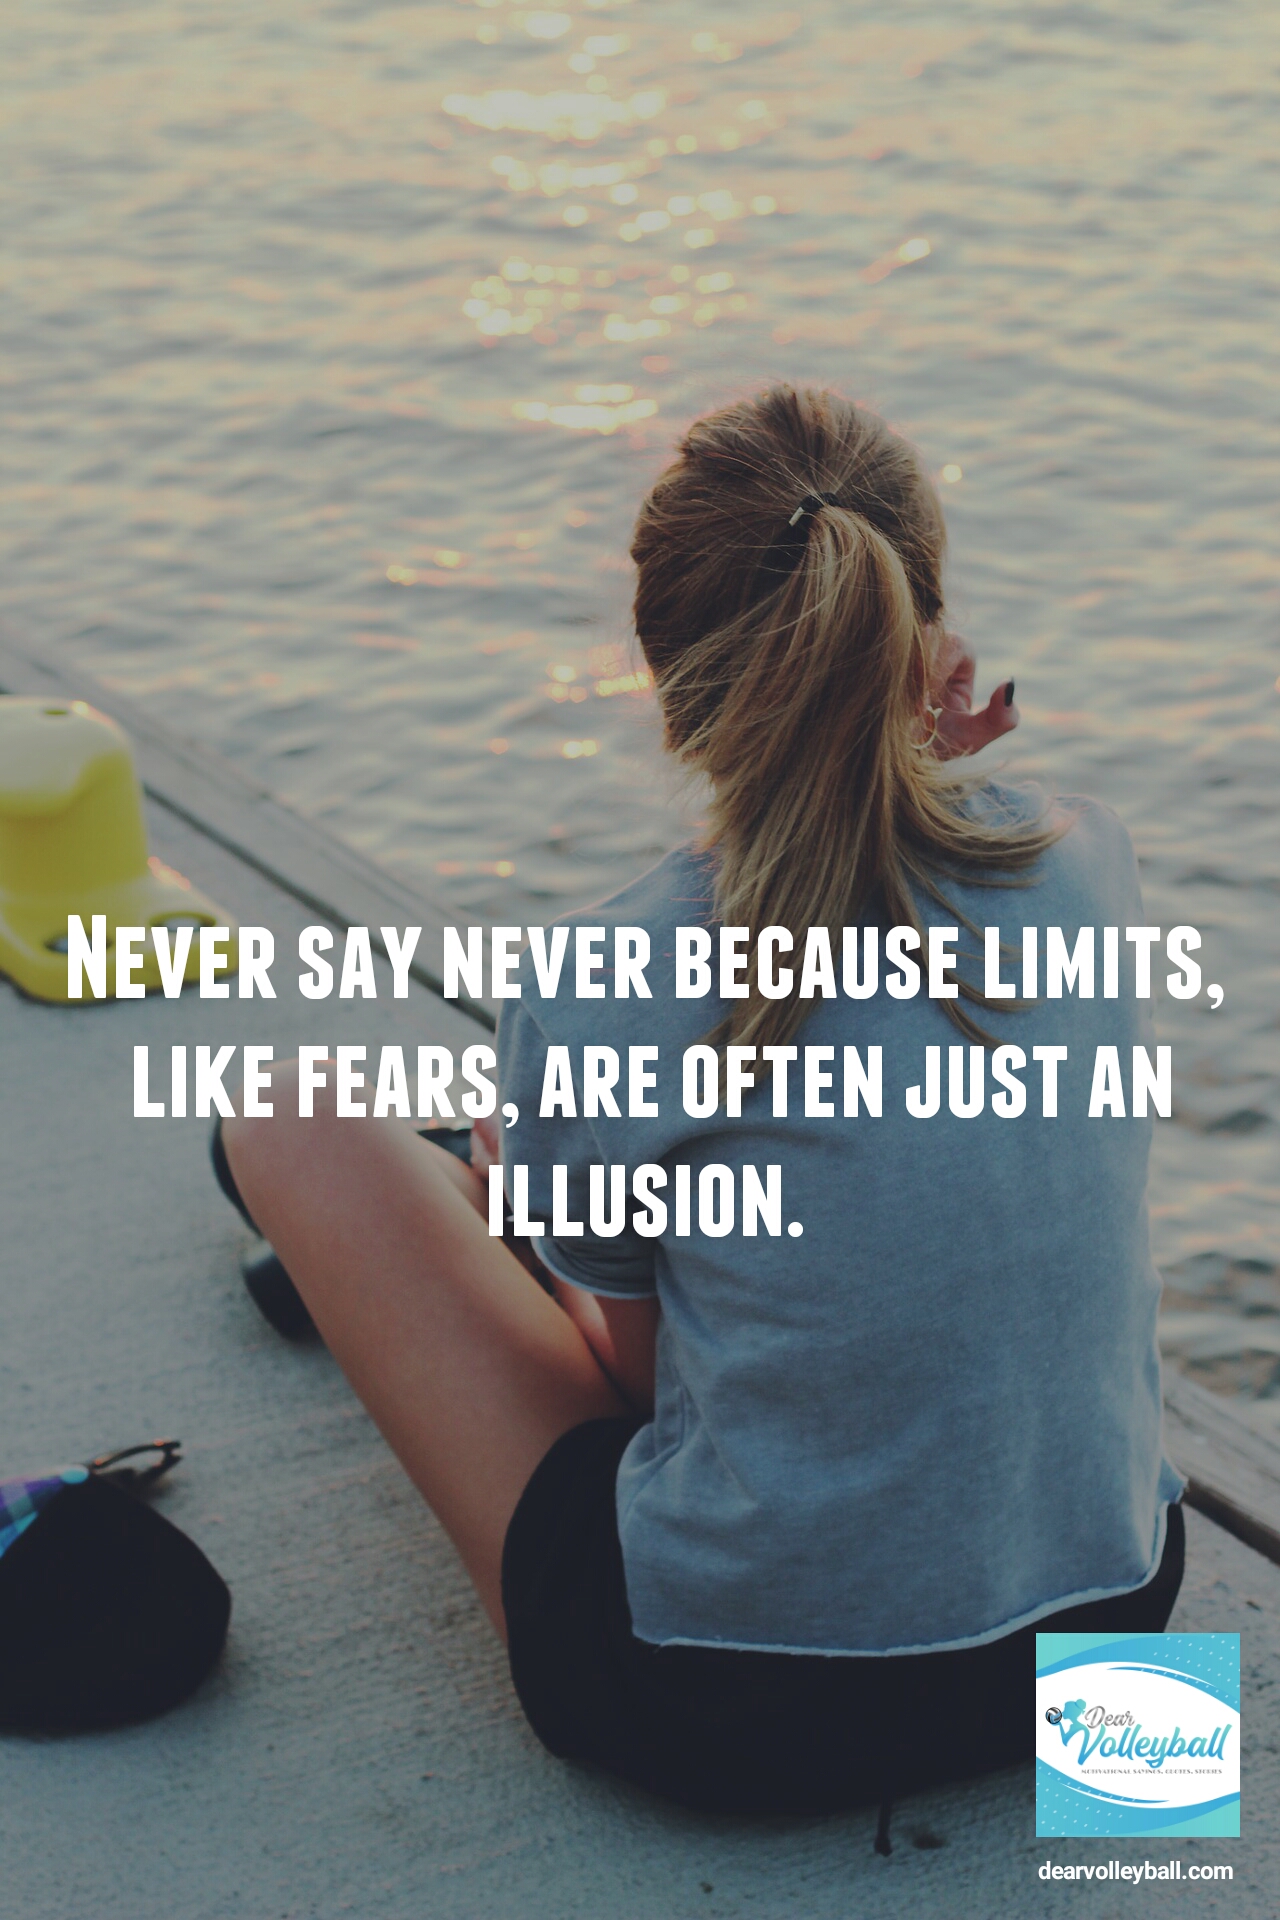 "Never say never because limits, like fears, are often just an illusion." and other strong girls pictures paired with an inspirational volleyball quote on Dear Volleyball.com.